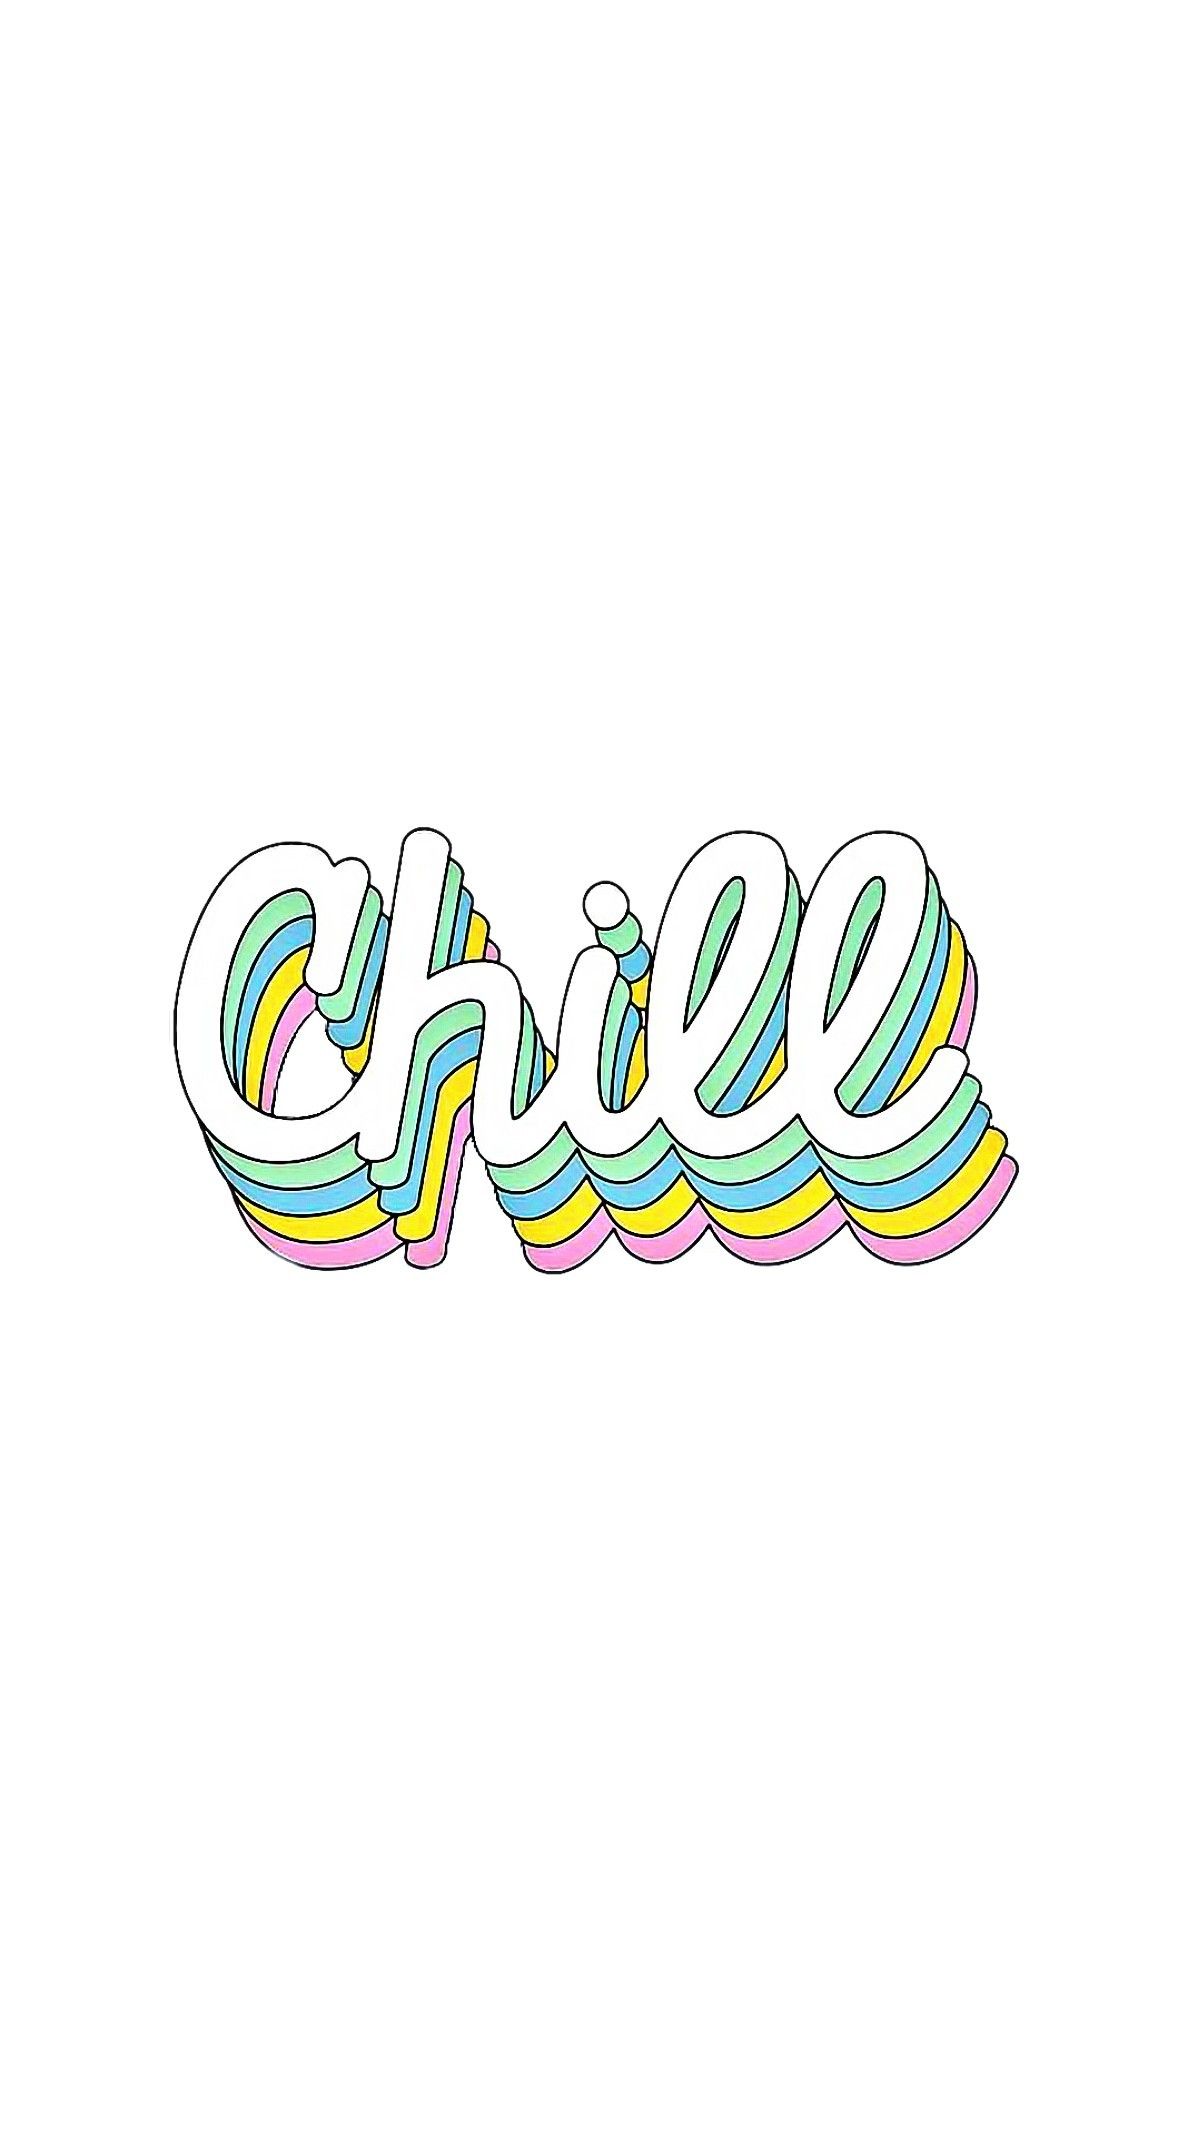 Just My Type. Chill wallpaper, Colorful wallpaper, Wallpaper iphone cute